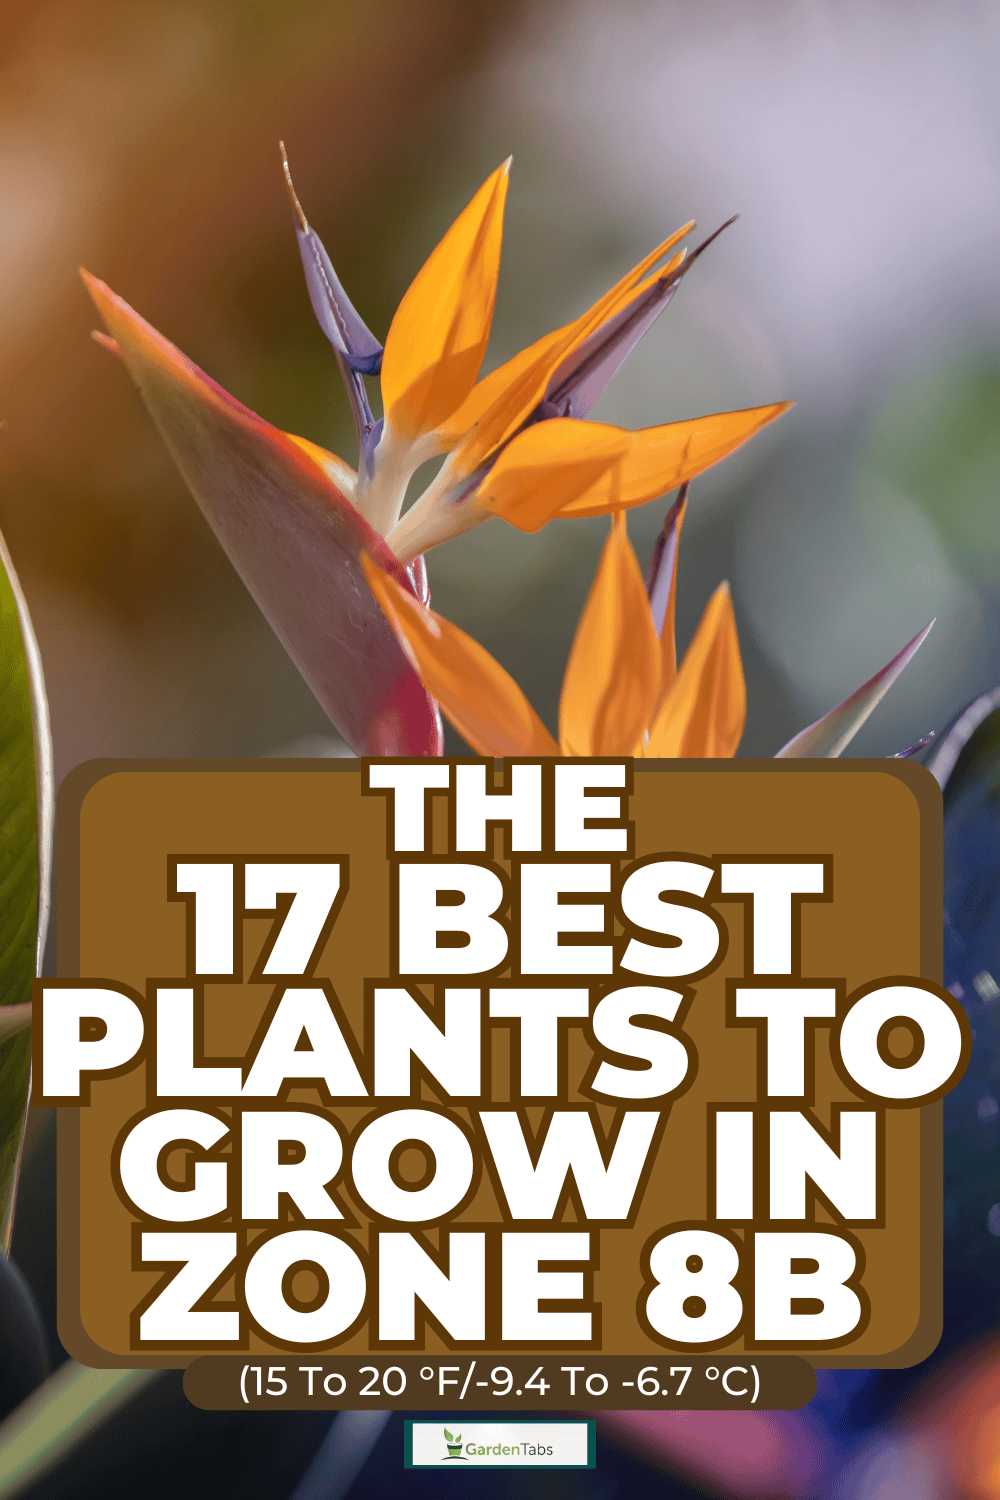 The 17 Best Plants to Grow in Zone 8b (15 to 20 °F/-9.4 to -6.7 °C)